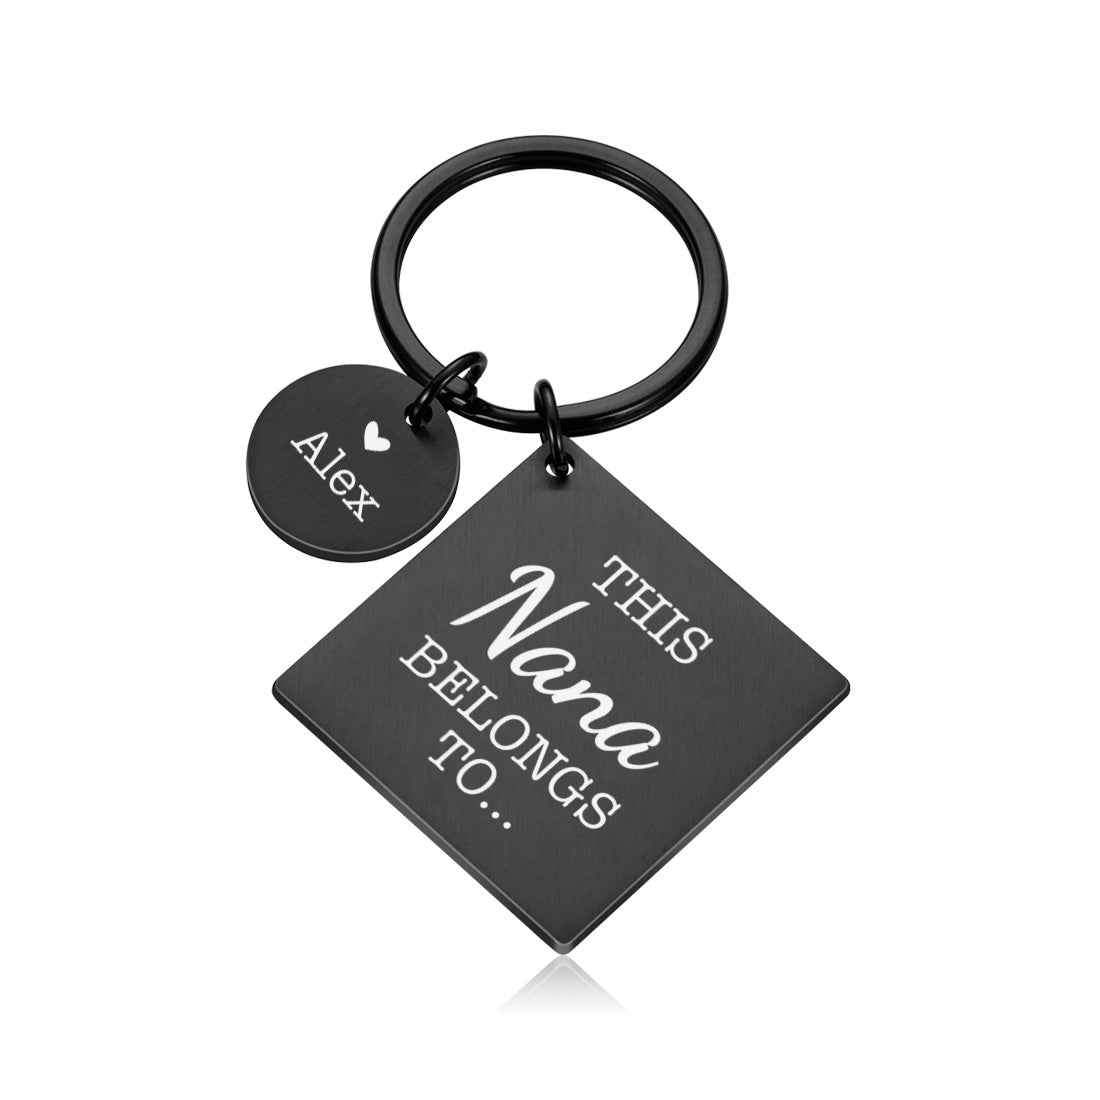 This Daddy Belongs to Metal Key ring Gift with Name